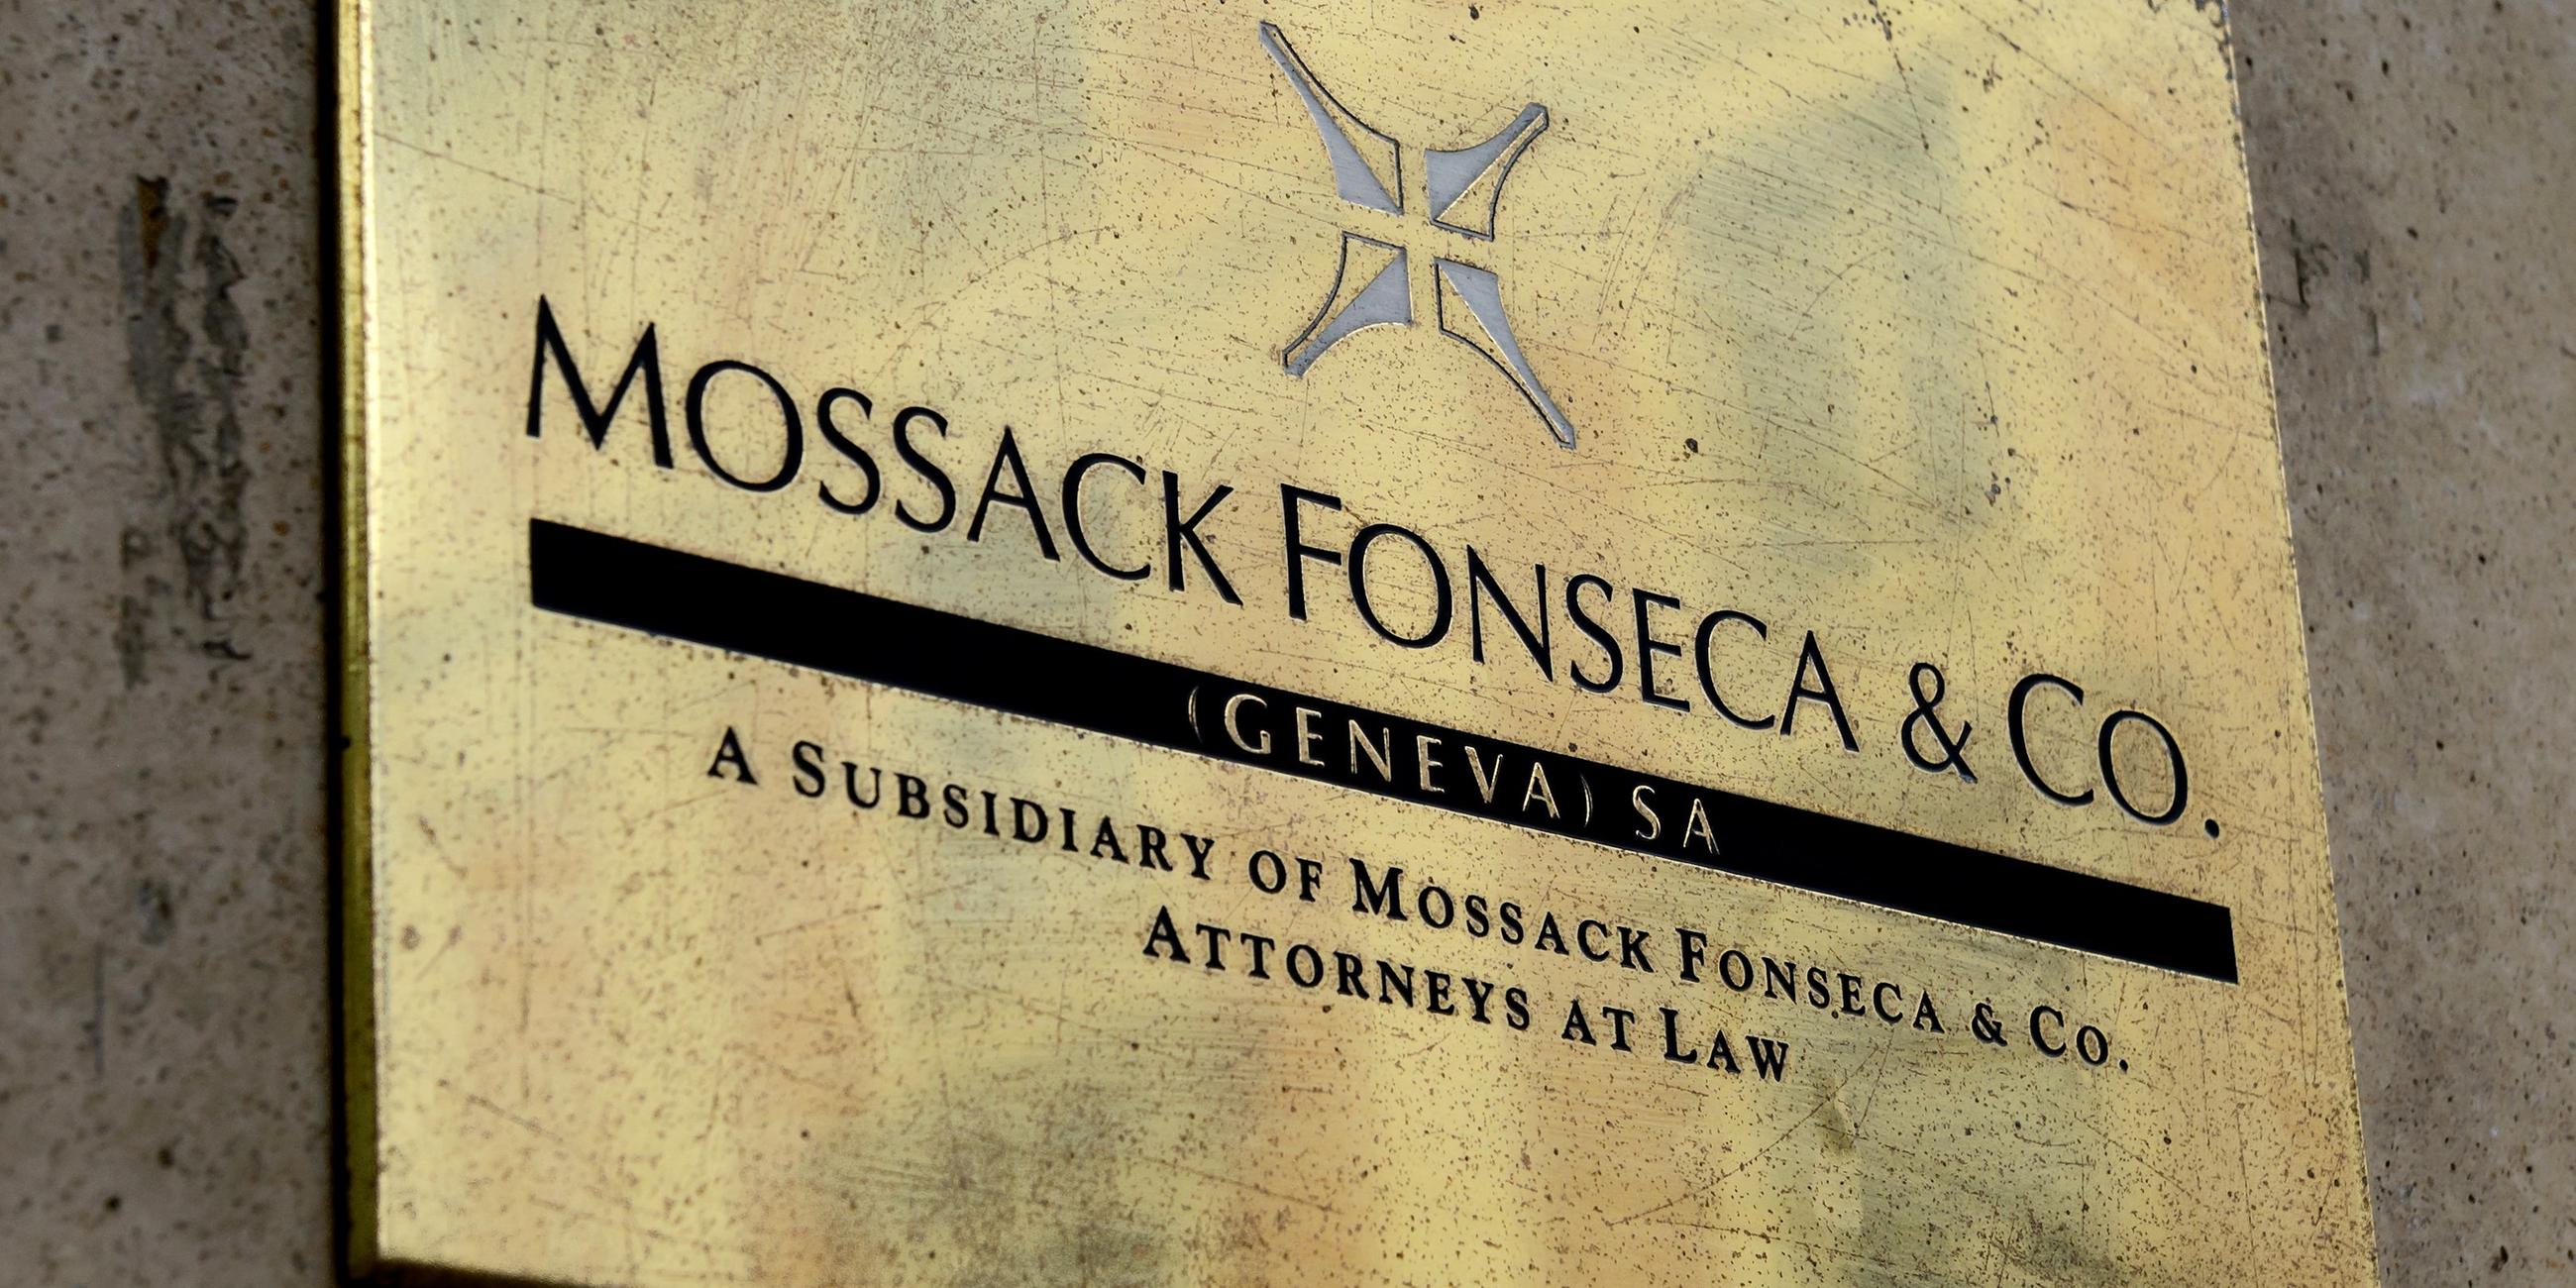 A plate of the Geneva office of the law firm Mossack Fonseca is seen on June 16, 2016 in Geneva.